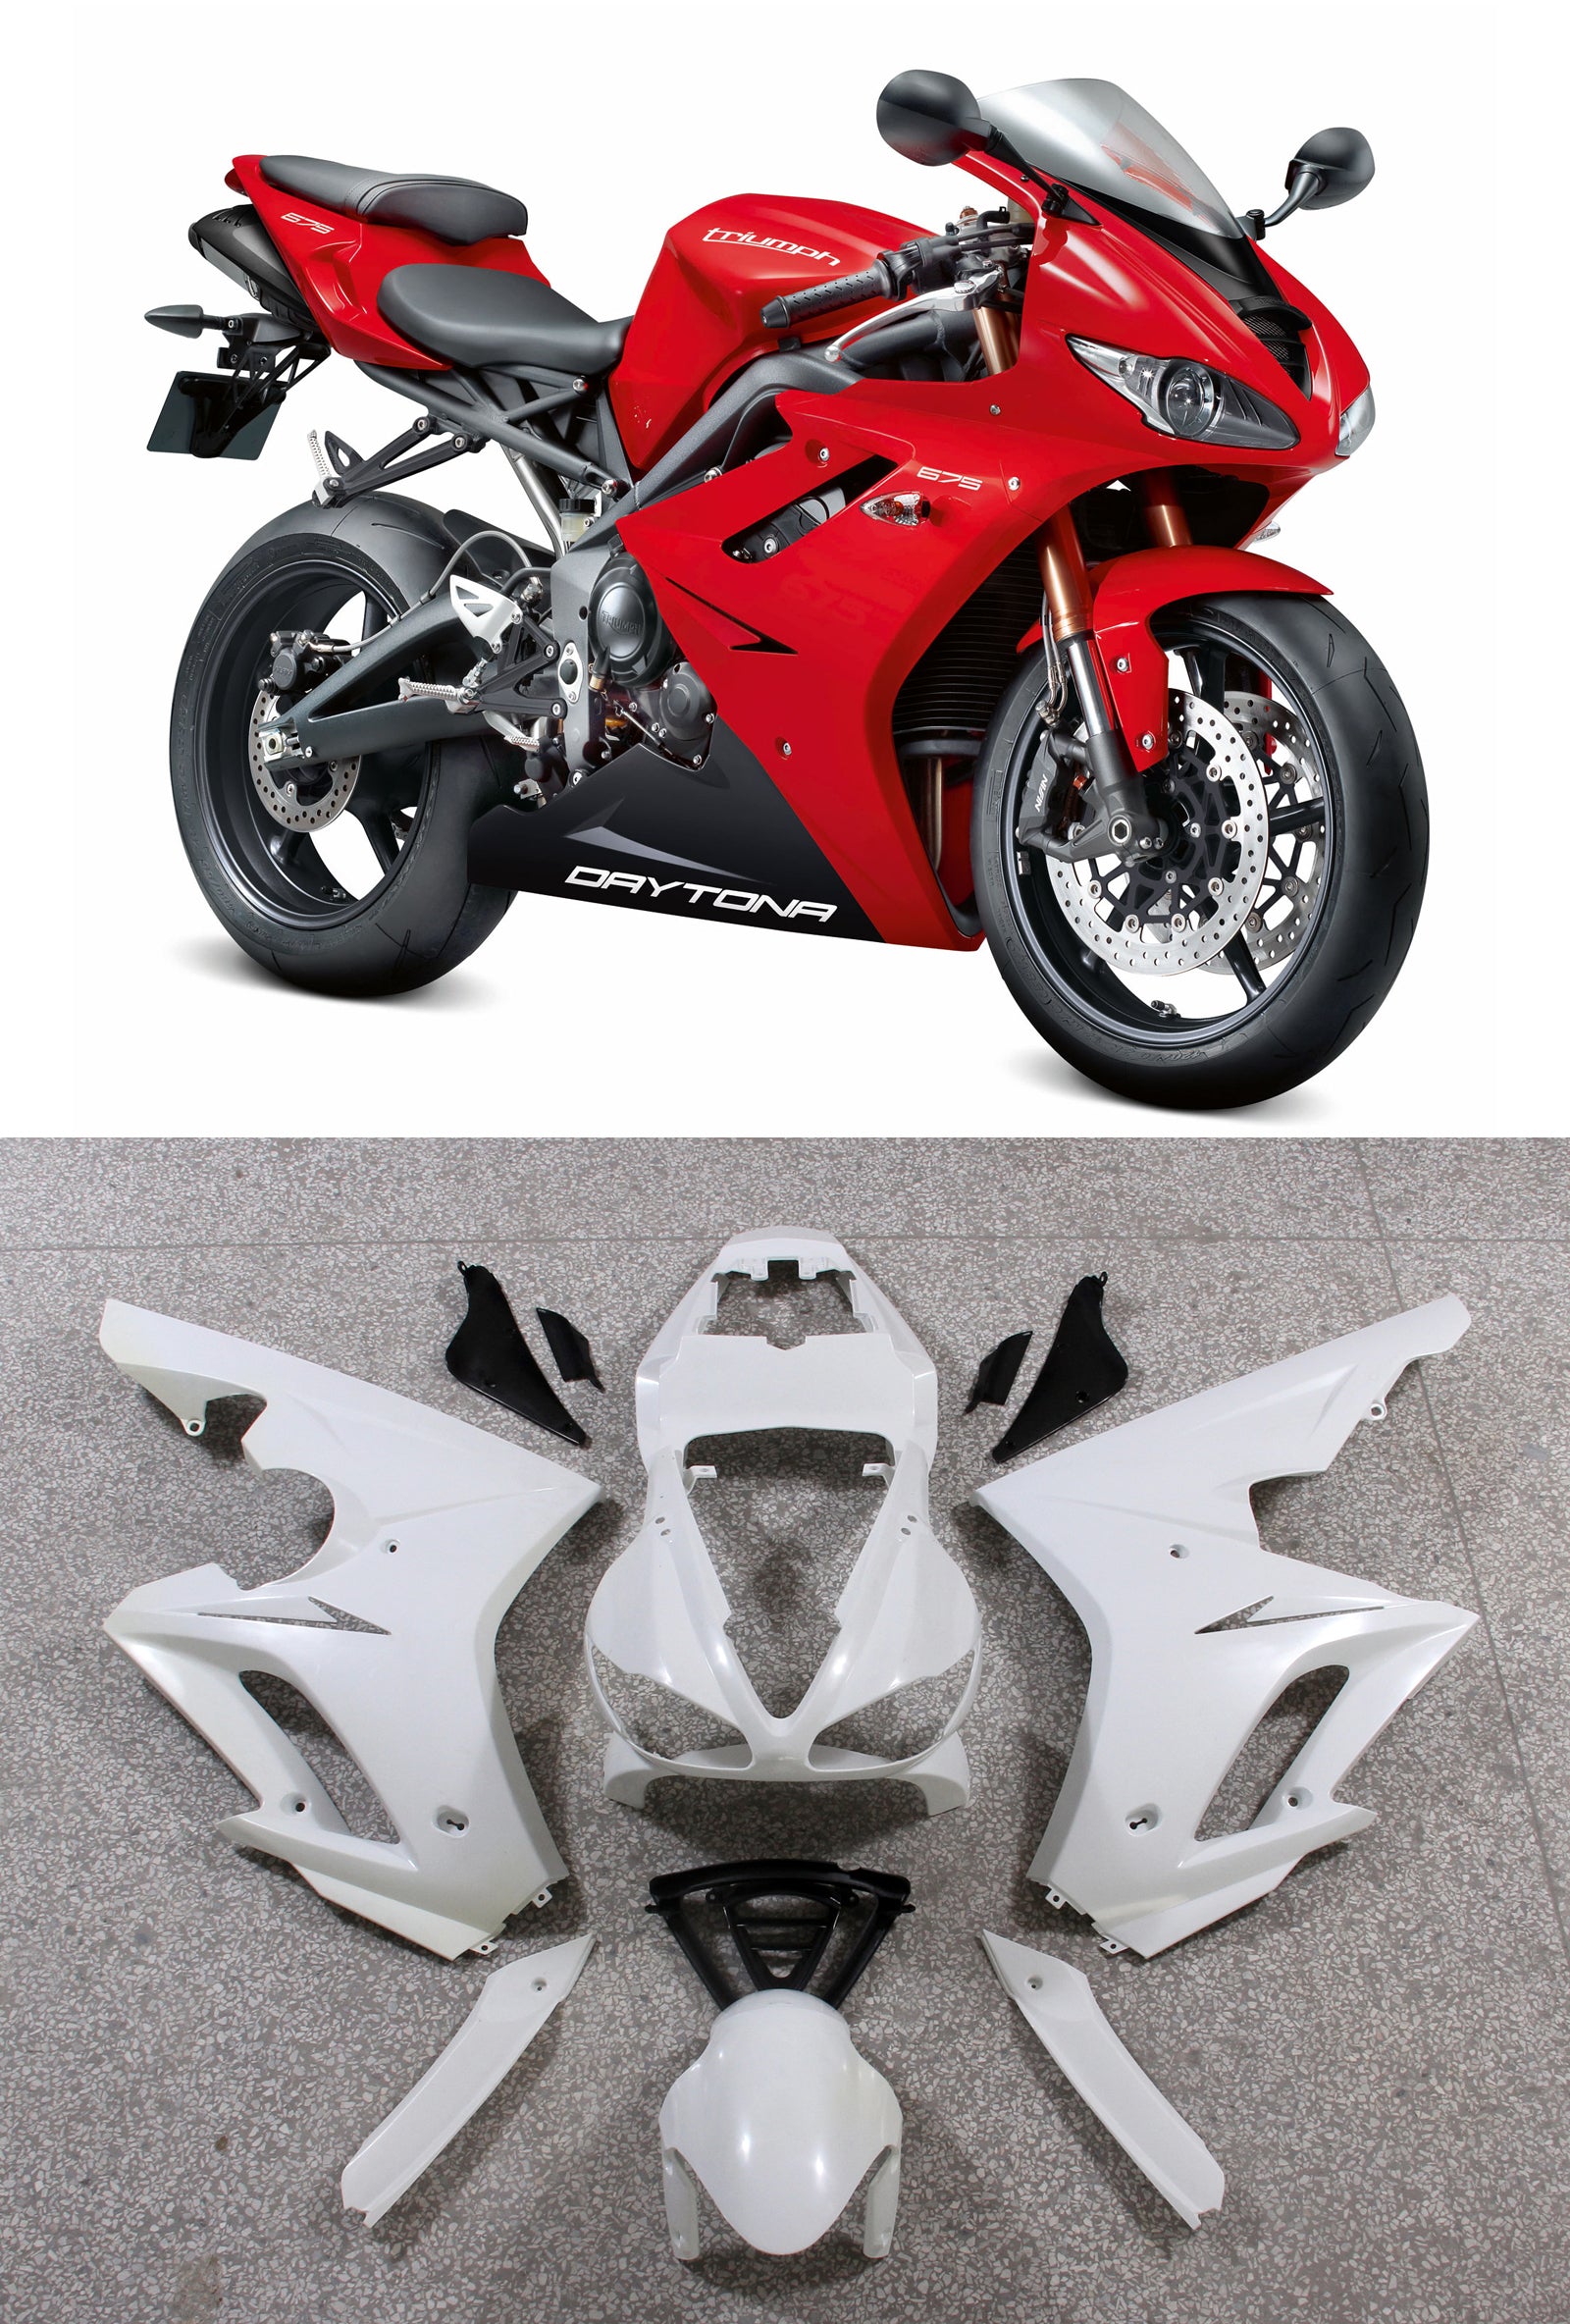 Generic Fit For Triumph Daytona 675 (2009-2012) Bodywork Fairing ABS Injection Molding 9 Style